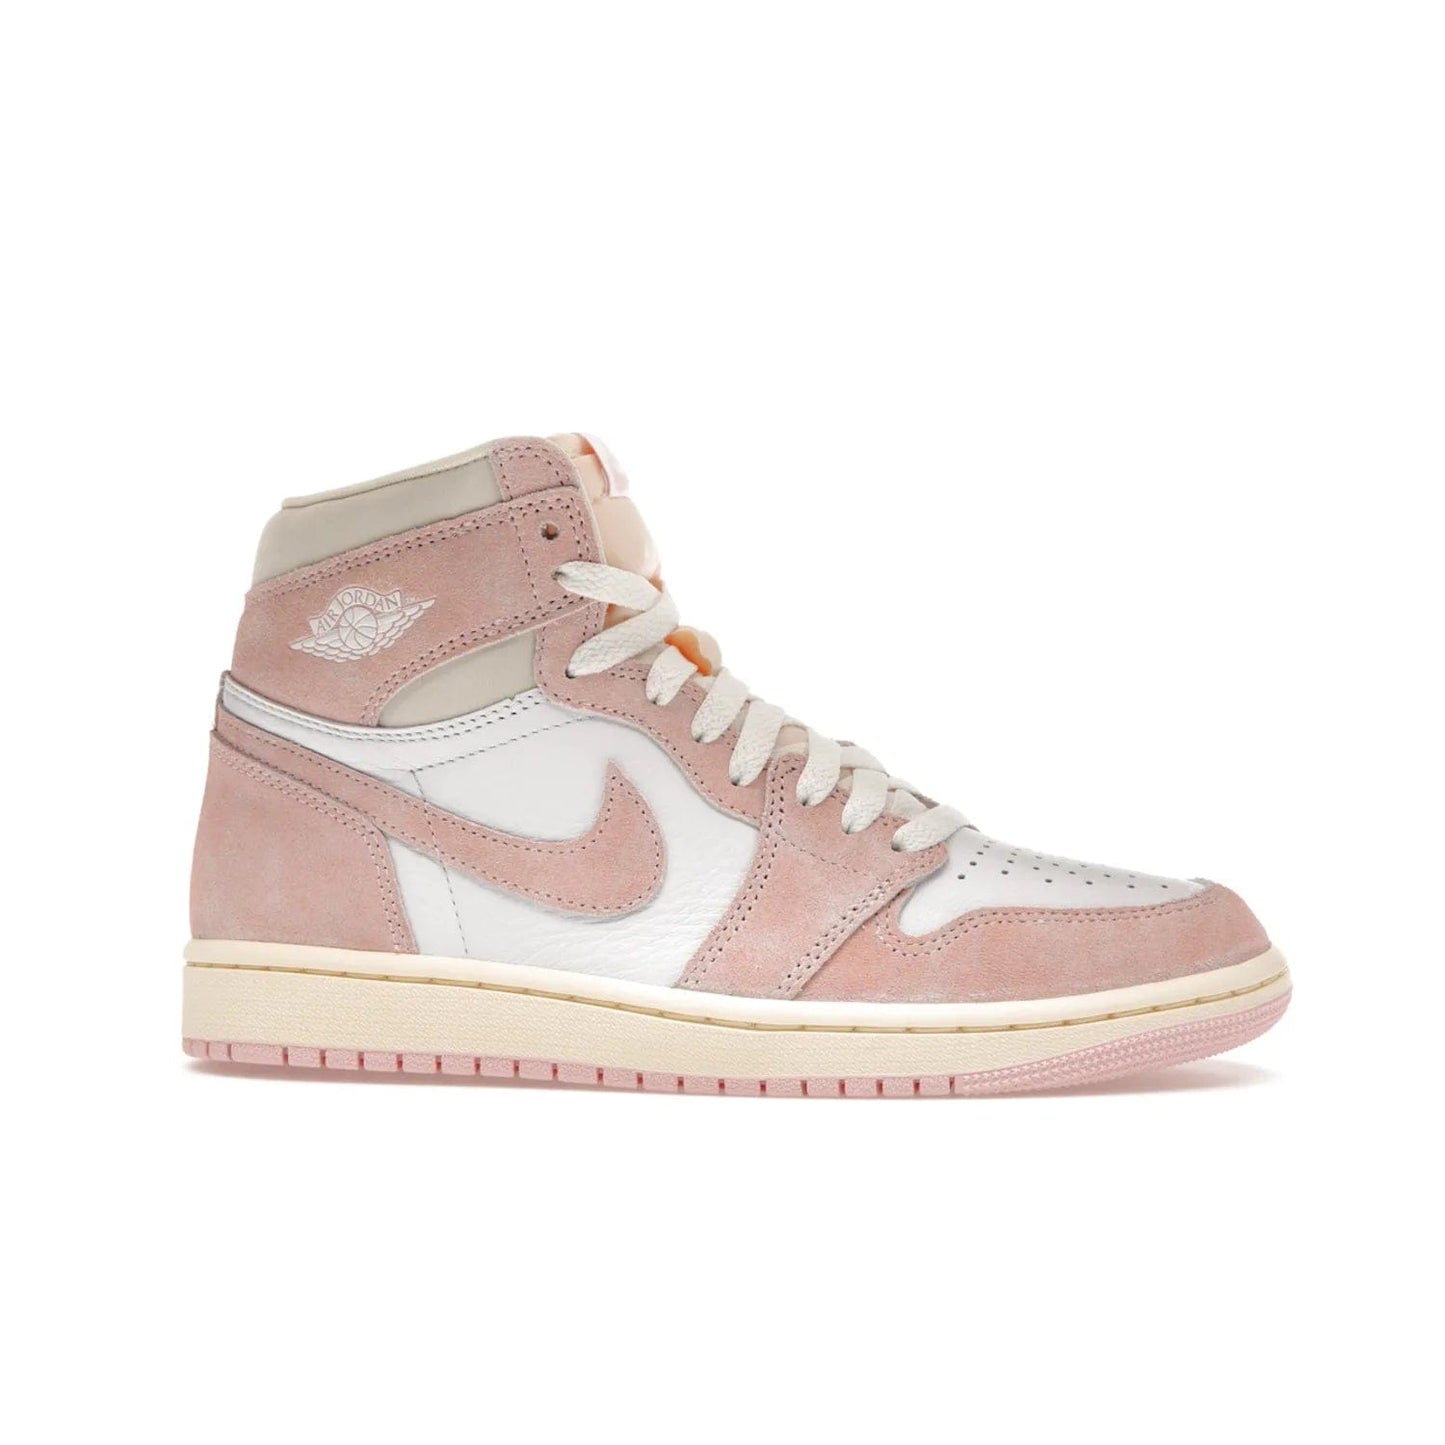 Jordan 1 Retro High OG Washed Pink (Women's) - Image 2 - Only at www.BallersClubKickz.com - Iconic Air Jordan 1 Retro High OG for women with unique pink suede and white leather uppers. Get the timeless look on April 22, 2023.